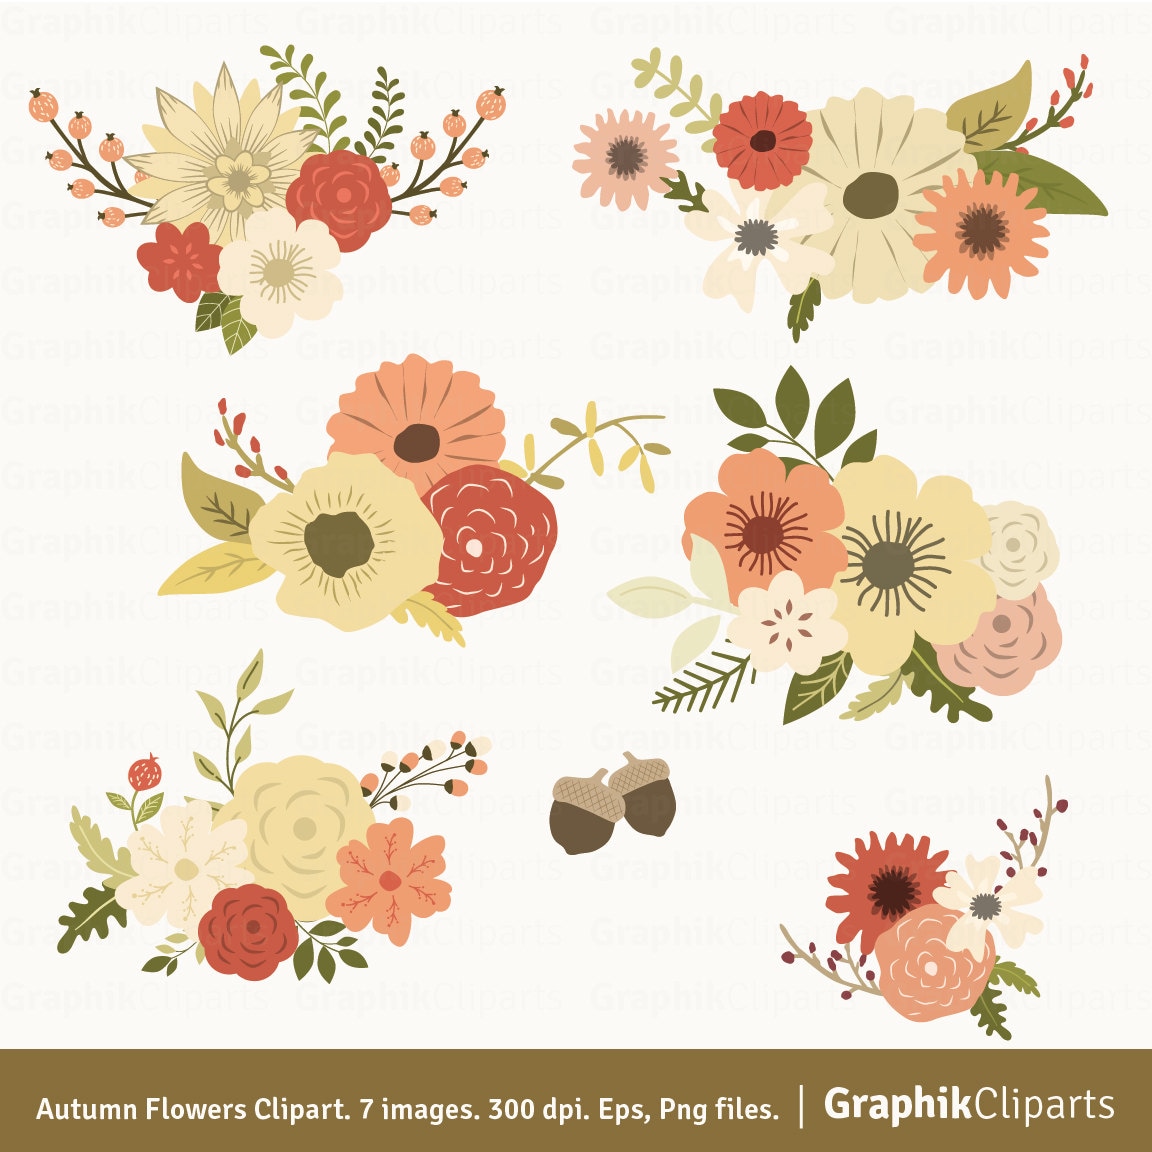 Autumn Flowers Clipart. Floral Clipart. Flowers for Wedding